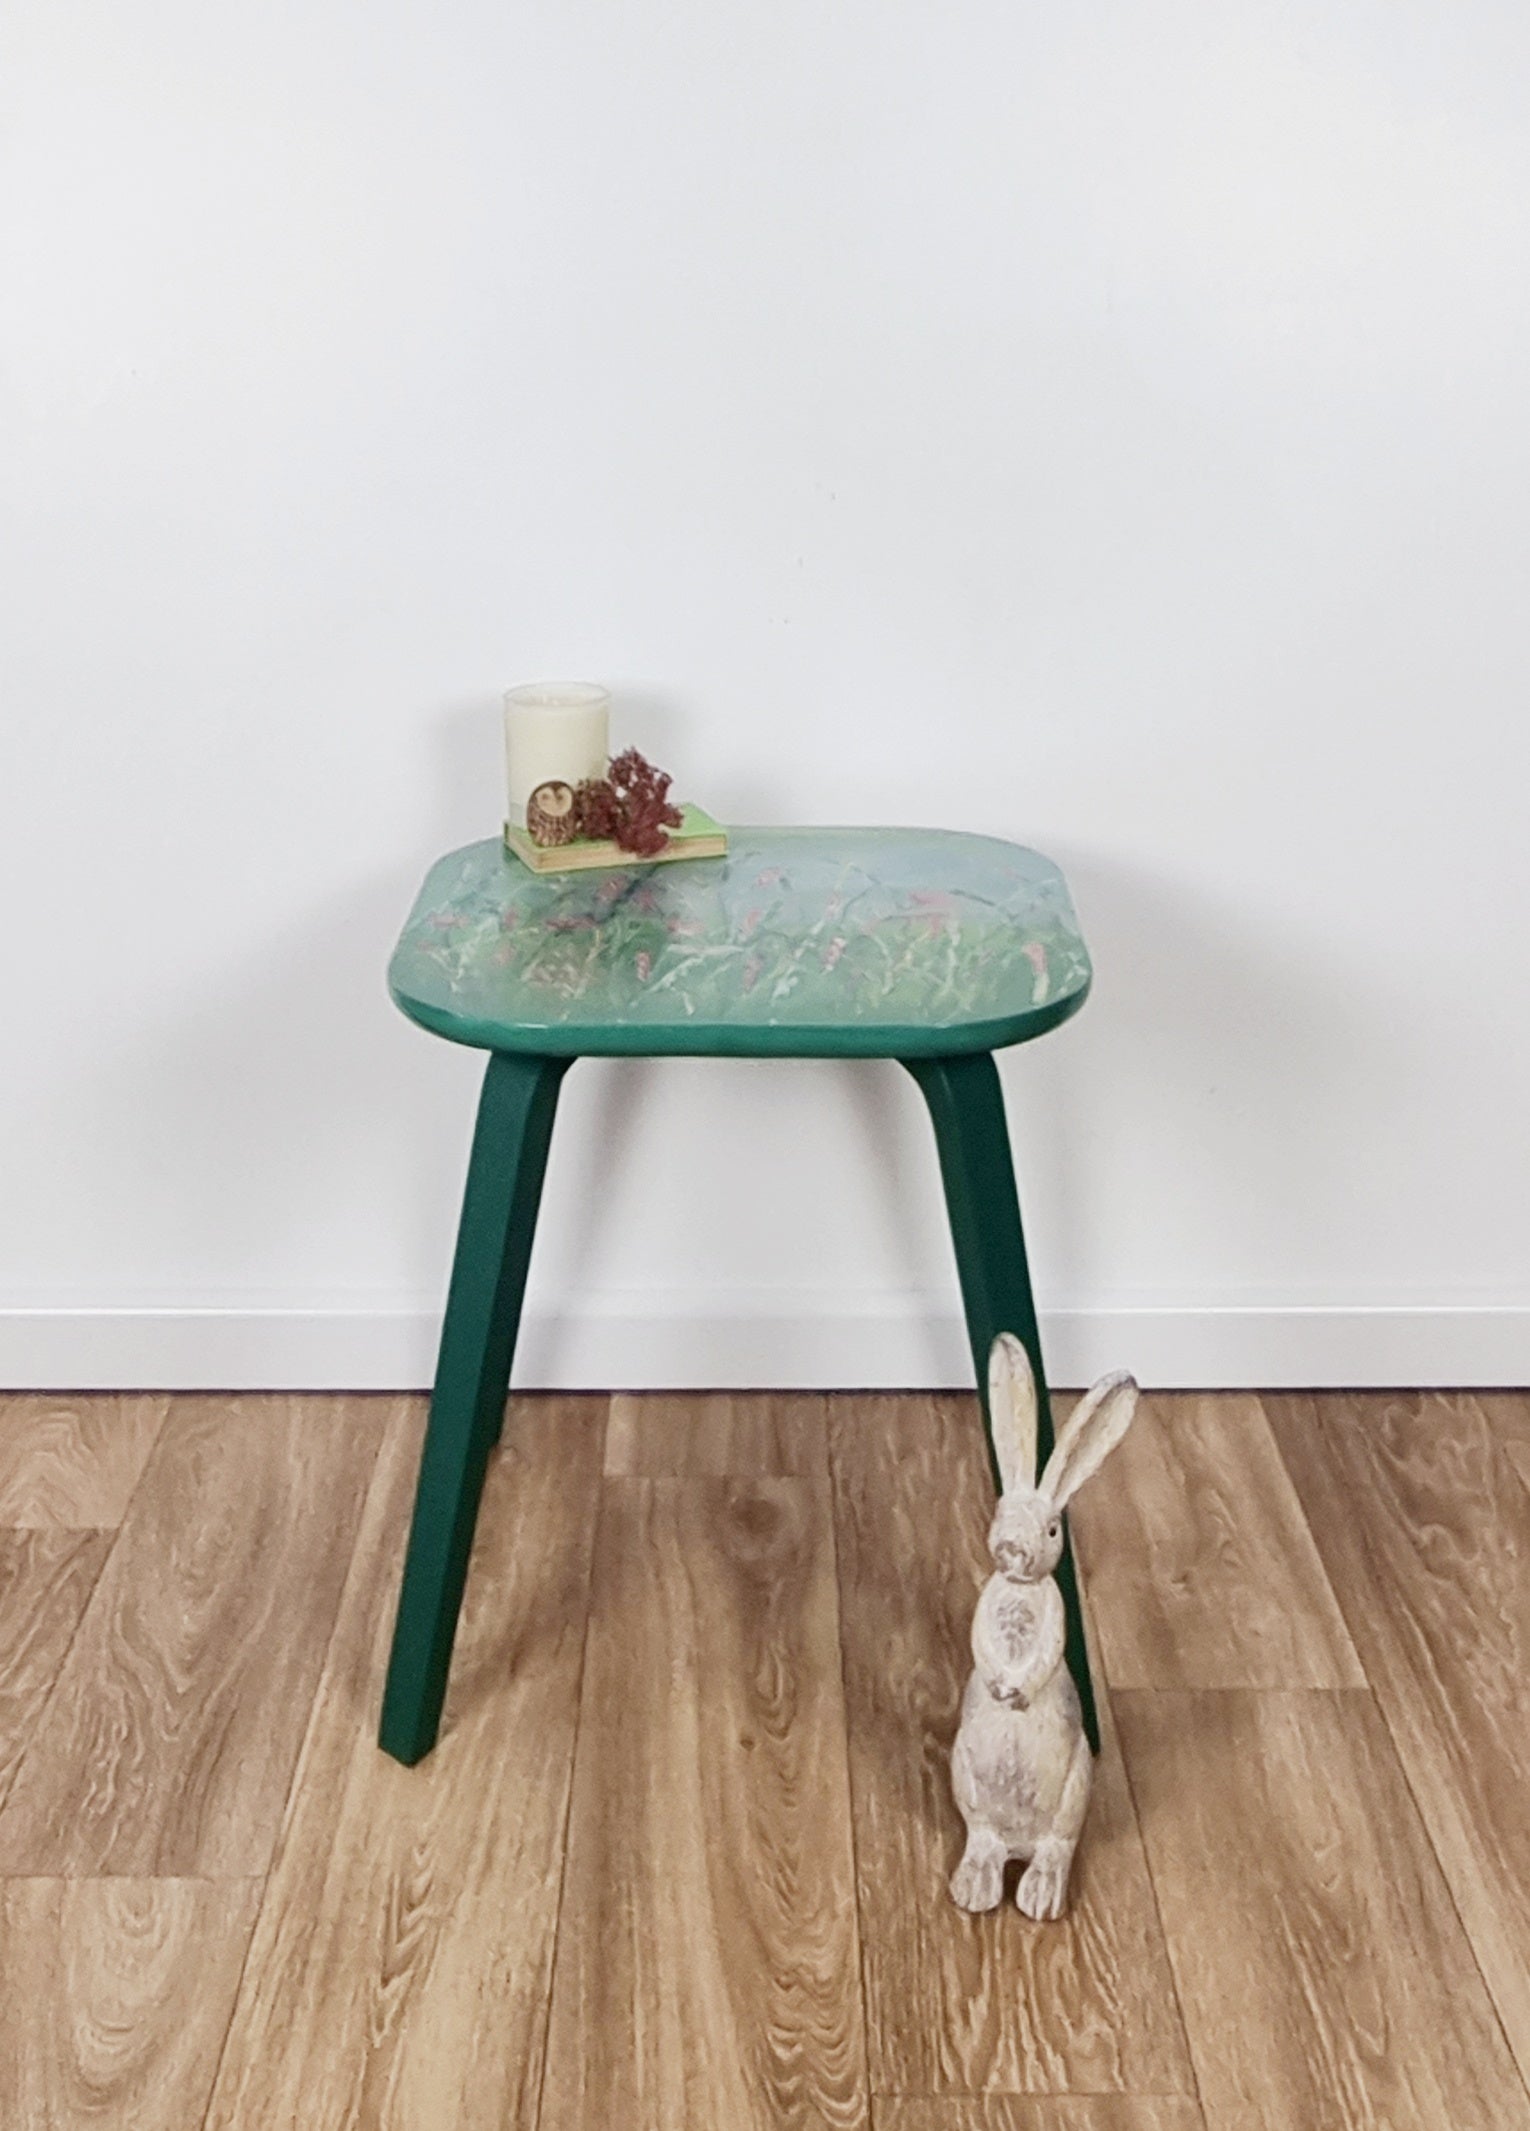 Hand painted floral side table legs painted in green with pretty flowers on the top